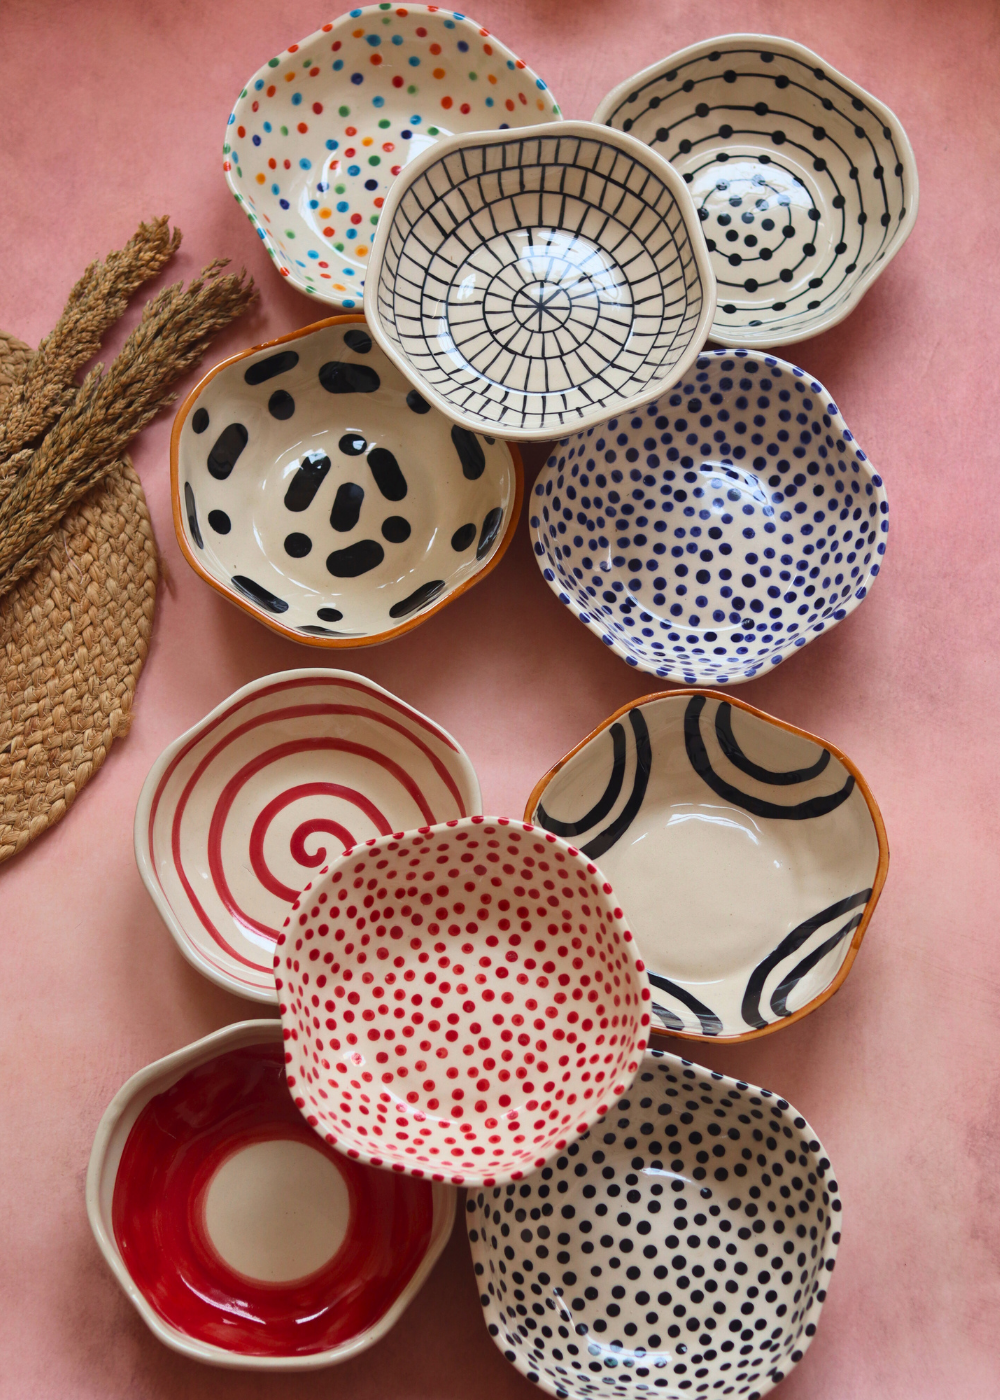 best selling bowls made by ceramic 